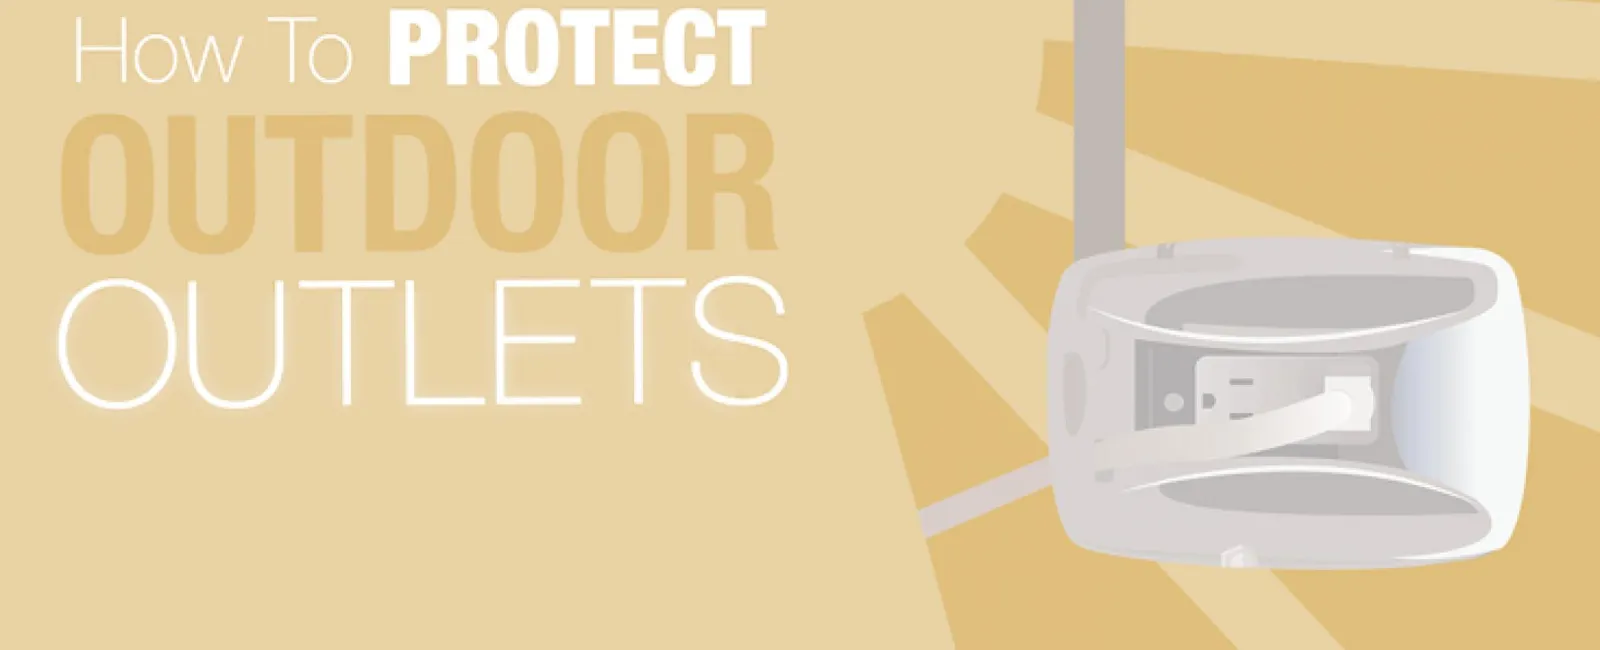 How to Protect Outdoor Outlets